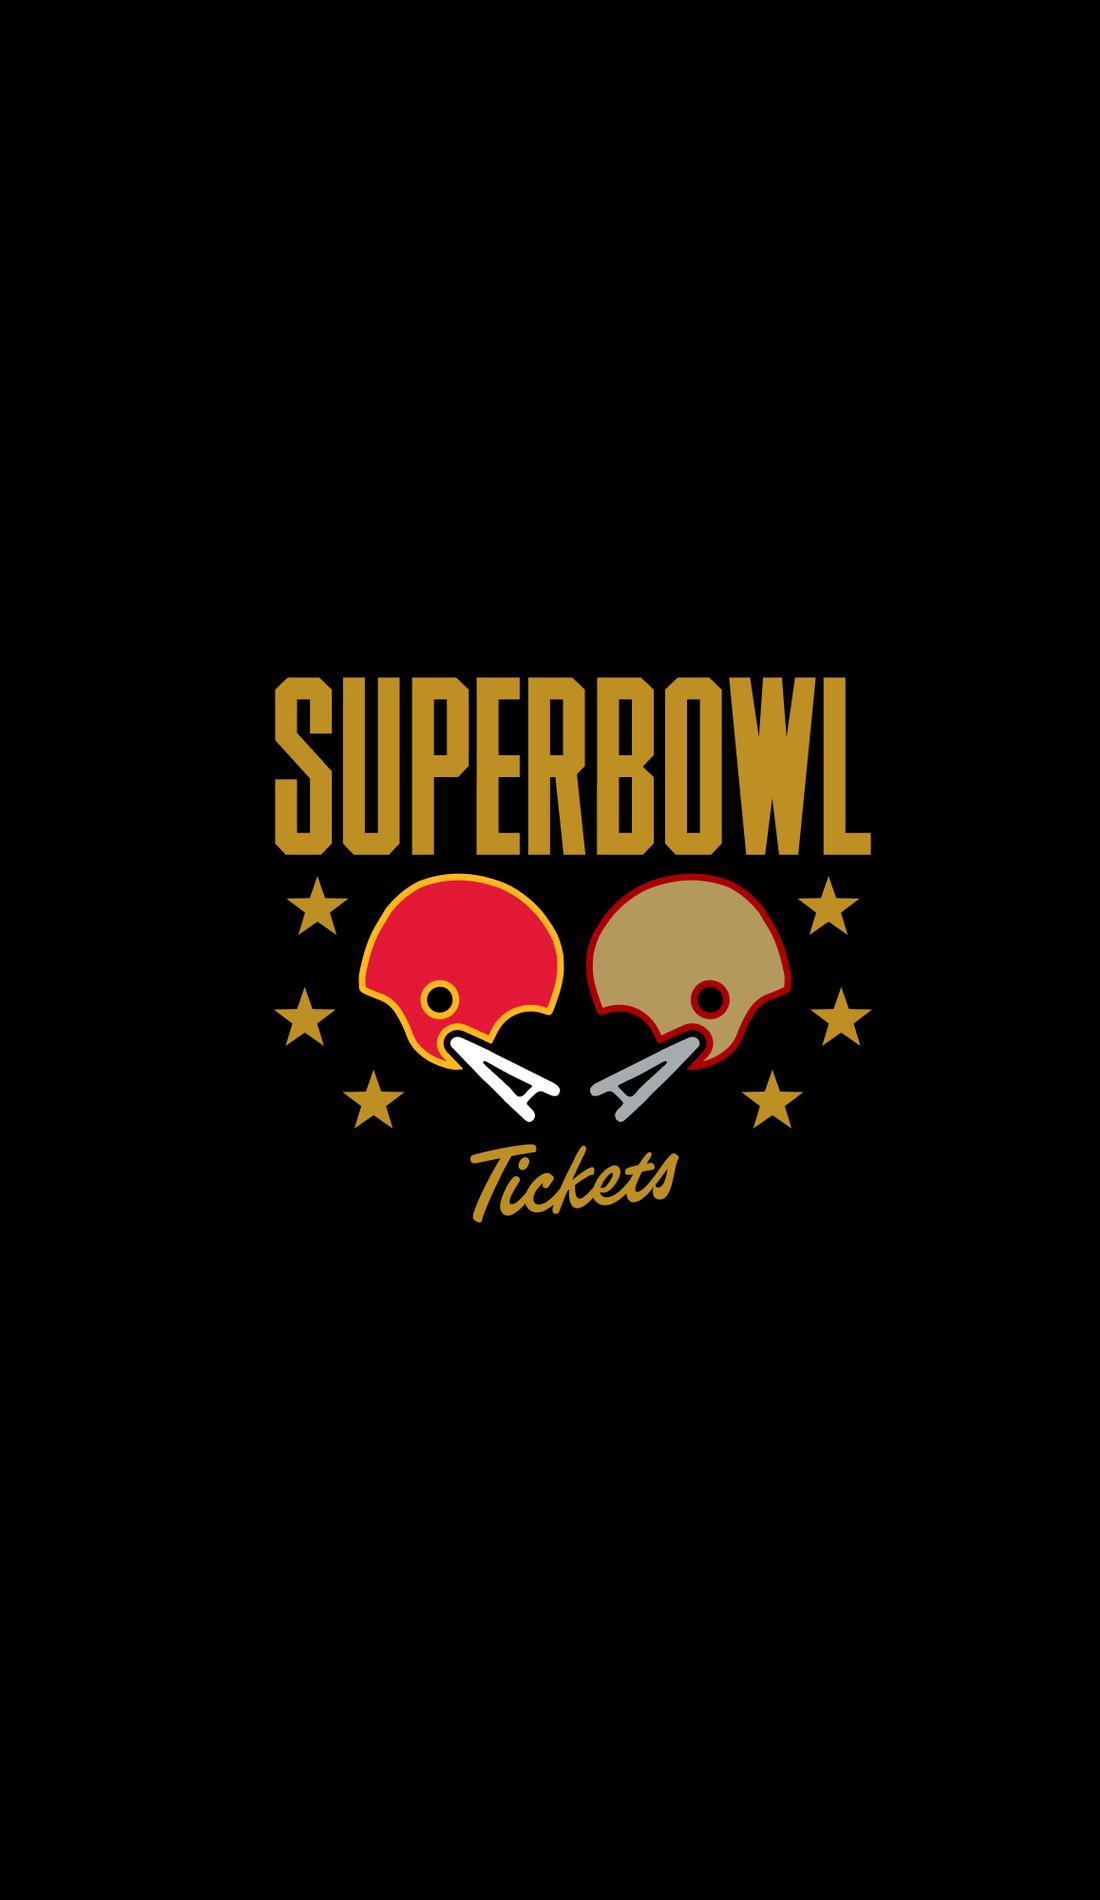 tickets for super bowl this year